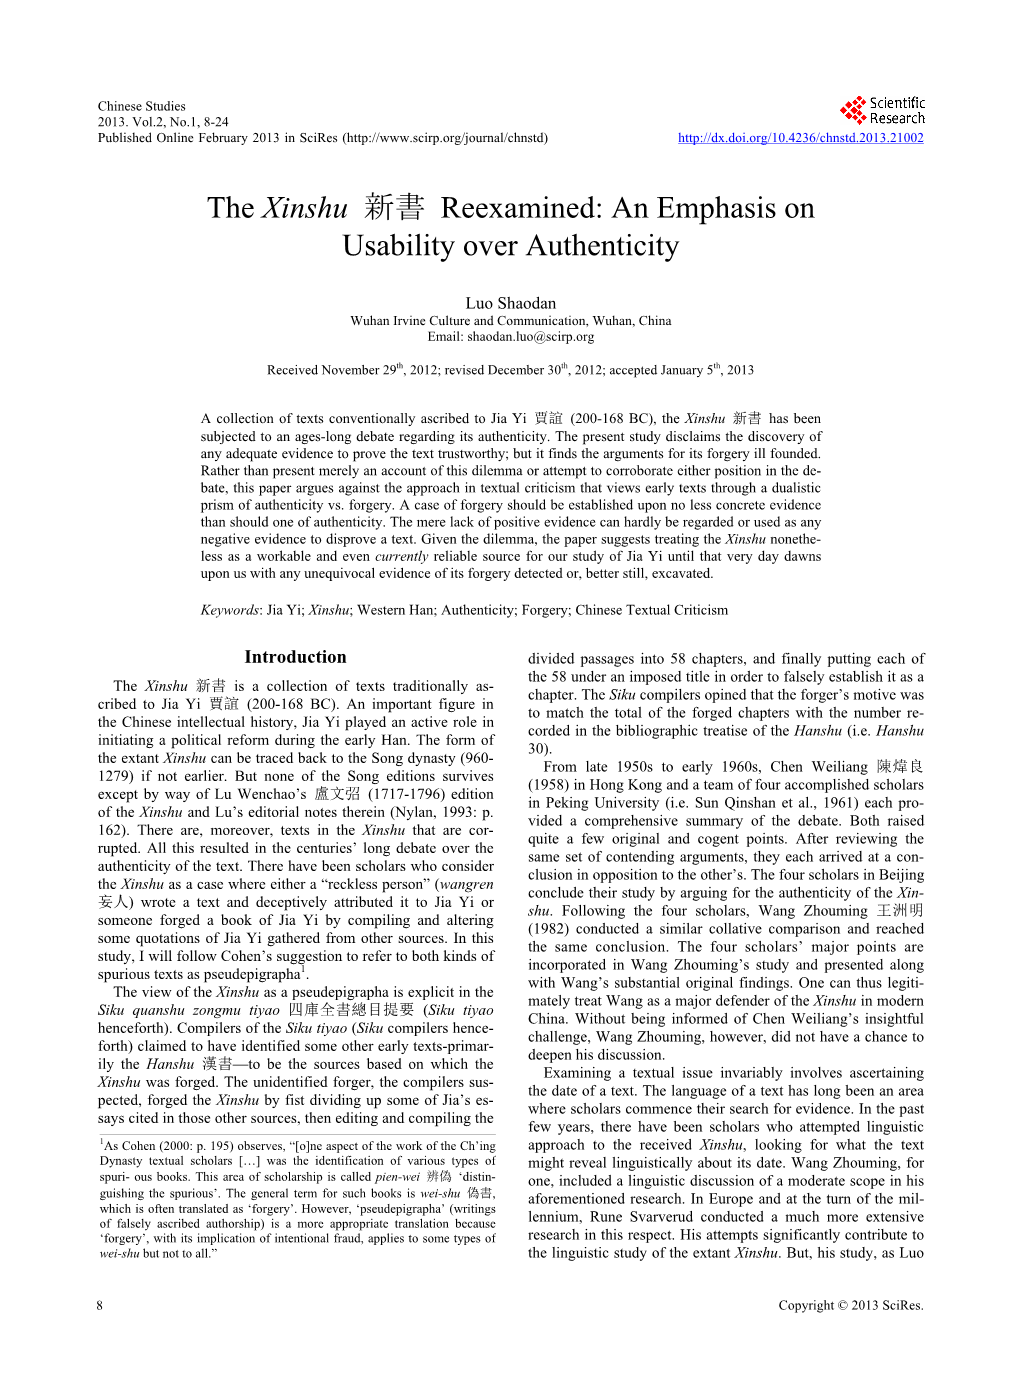 Xinshu 新書 Reexamined: an Emphasis on Usability Over Authenticity